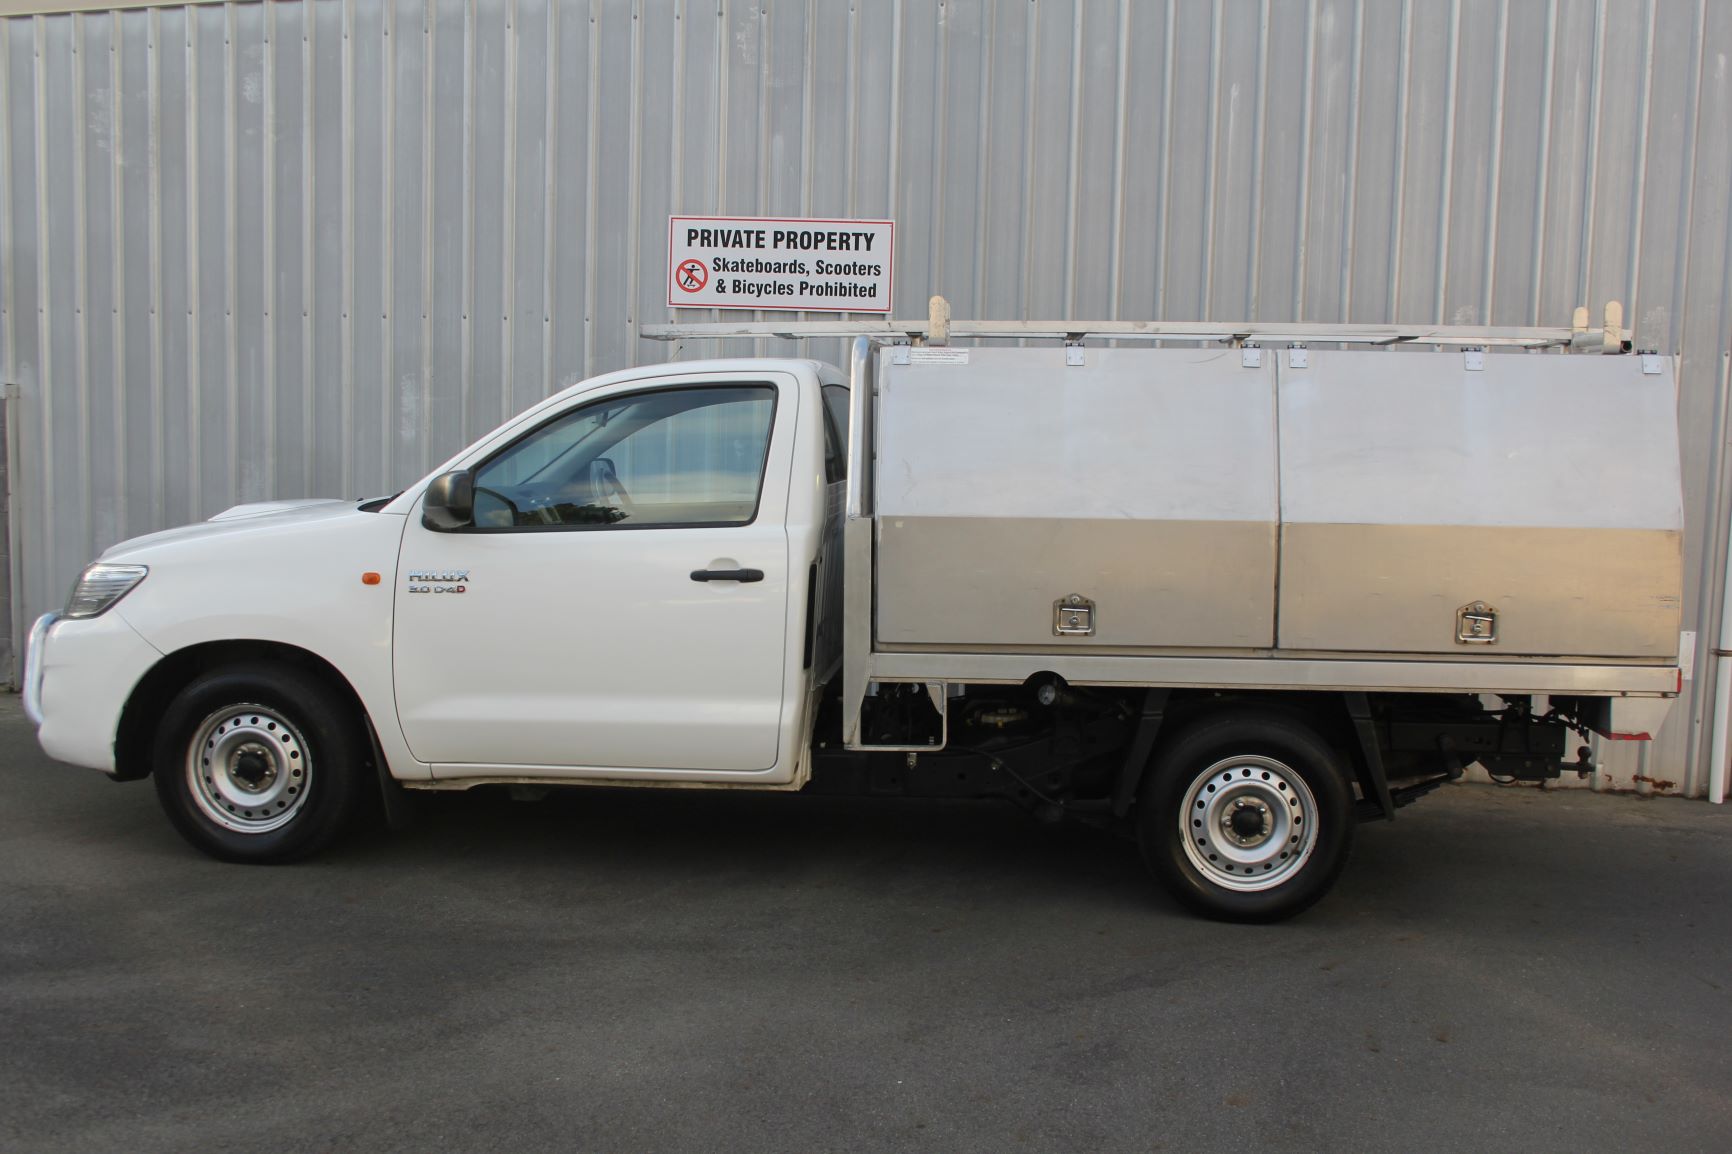 Toyota Hilux 2wd service body 2014 for sale in Auckland